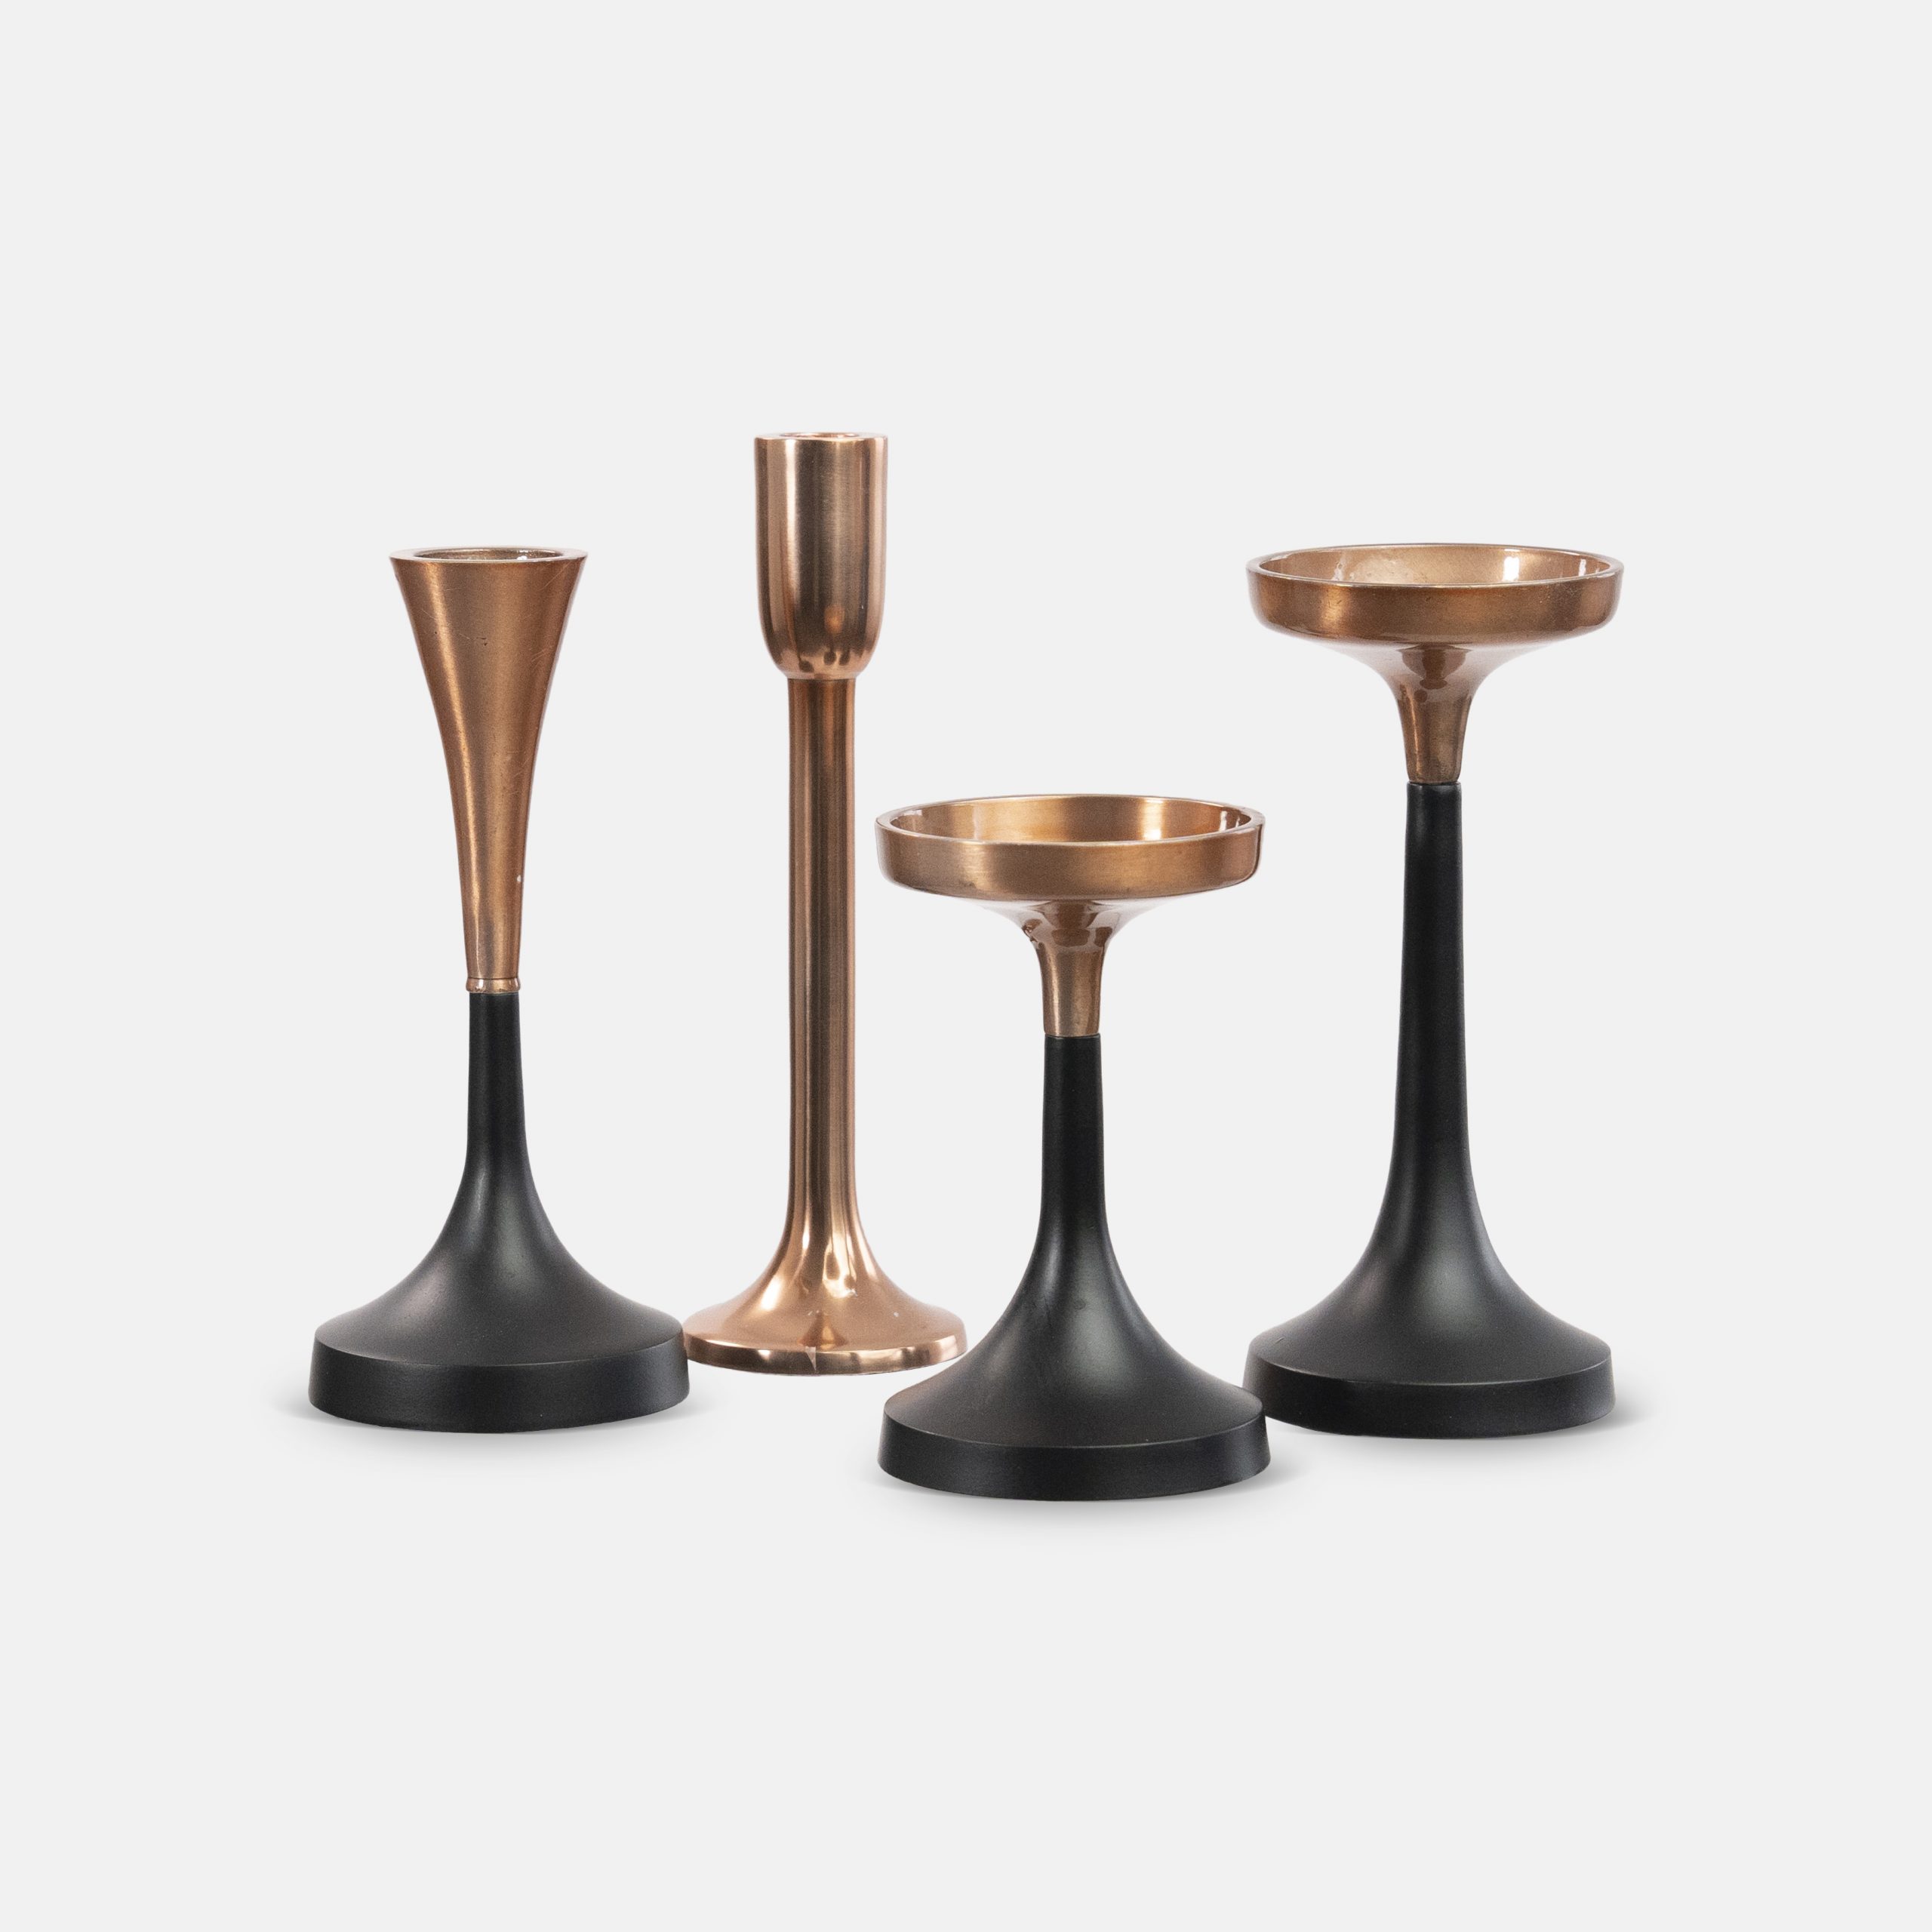 9. MODISH Candleholders, Copper and Black